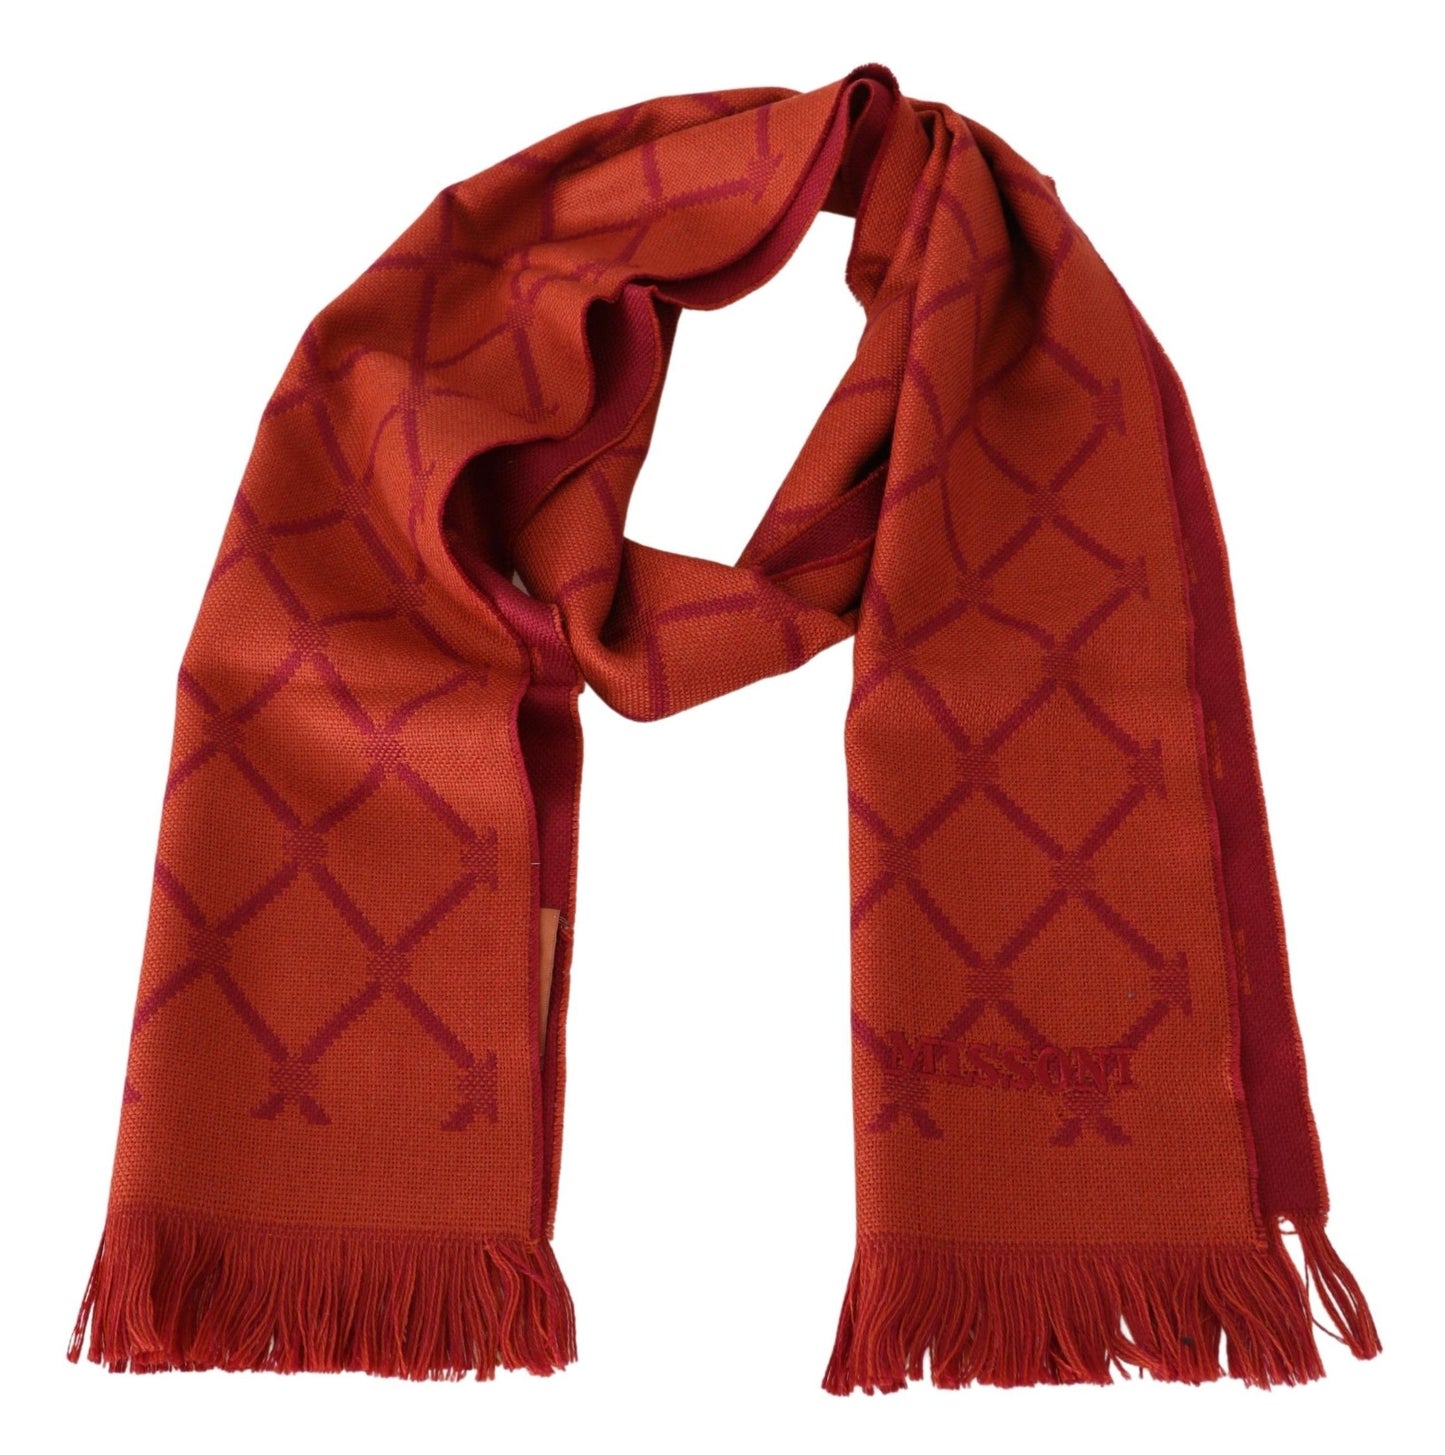 Red Patterned Wool Knit Unisex Neck Wrap Scarf